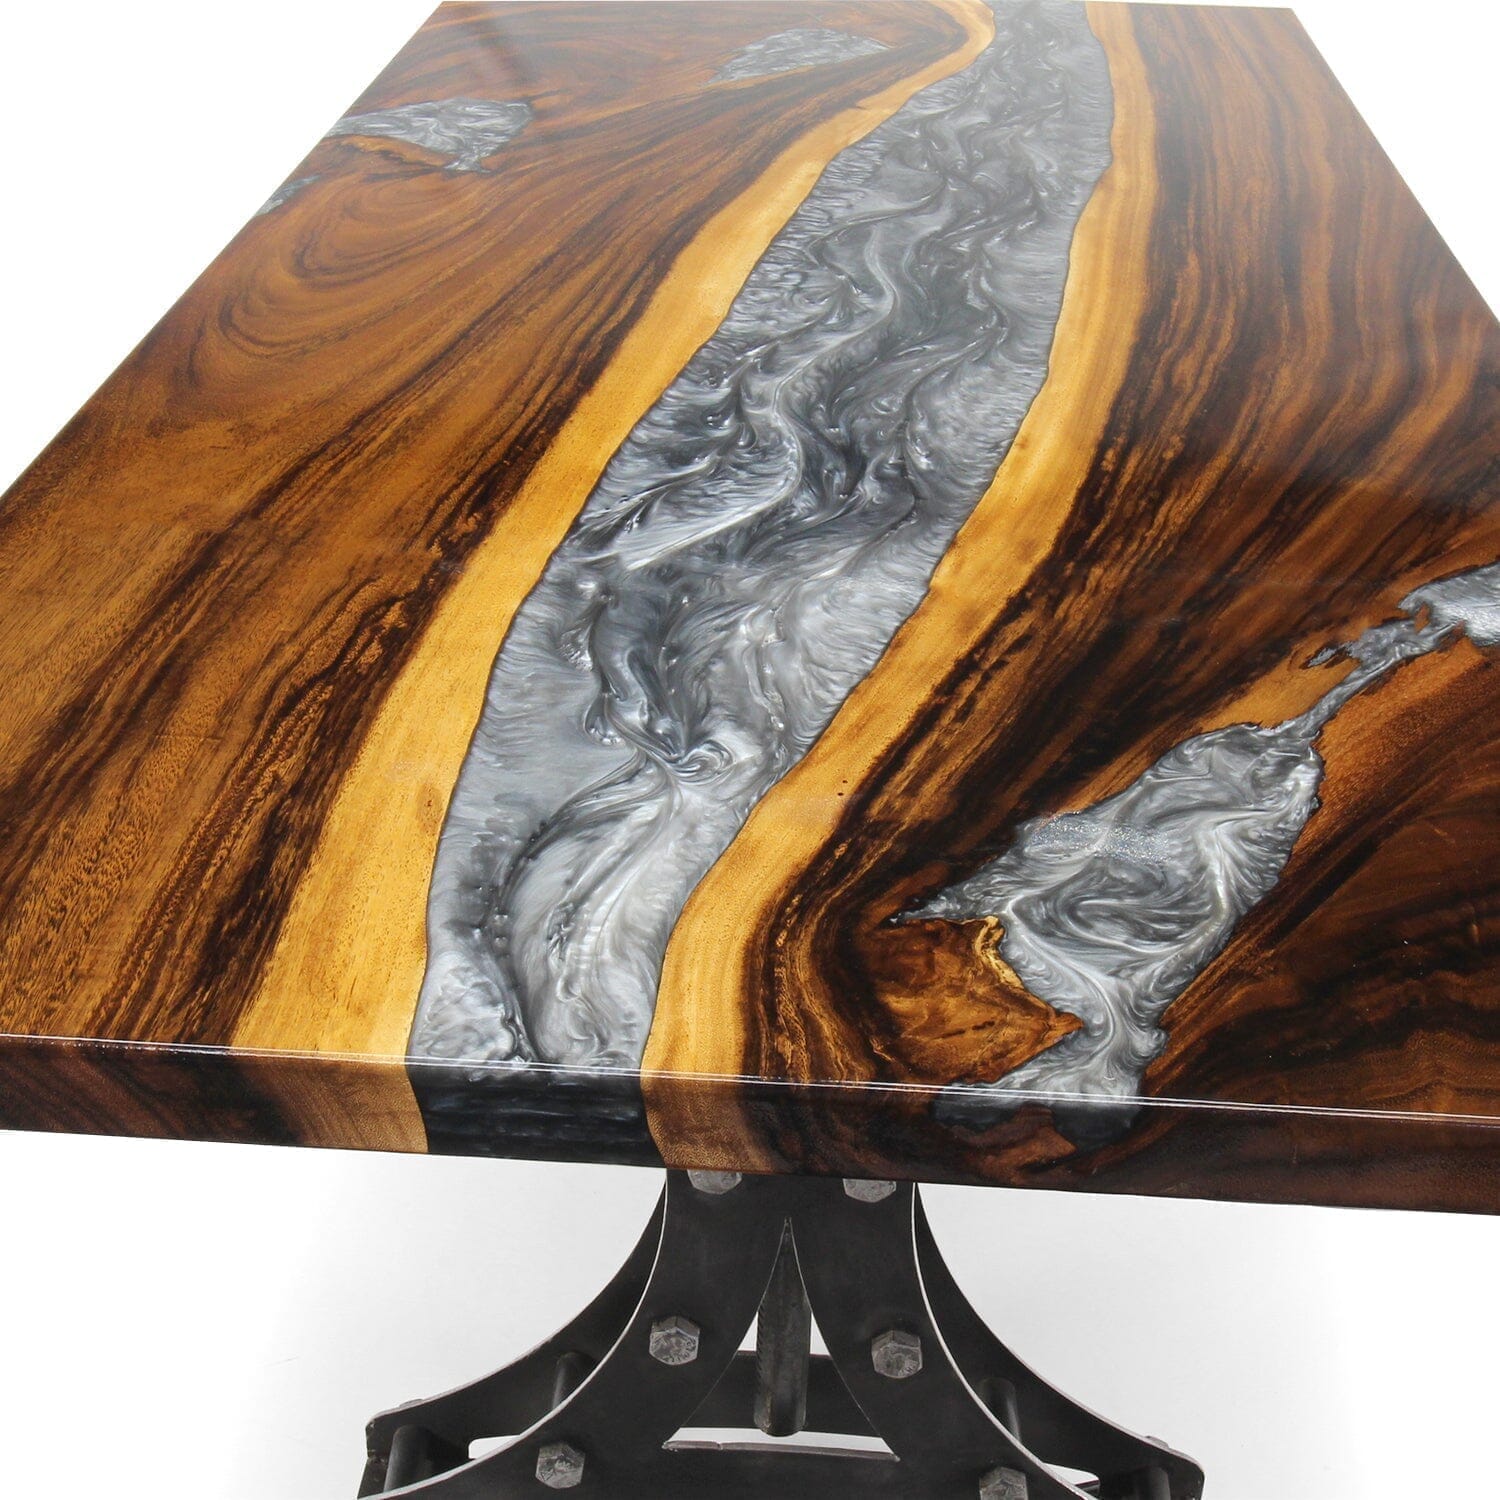 American Walnut Wooden River Table Top/ Epoxy Resin Full Cover